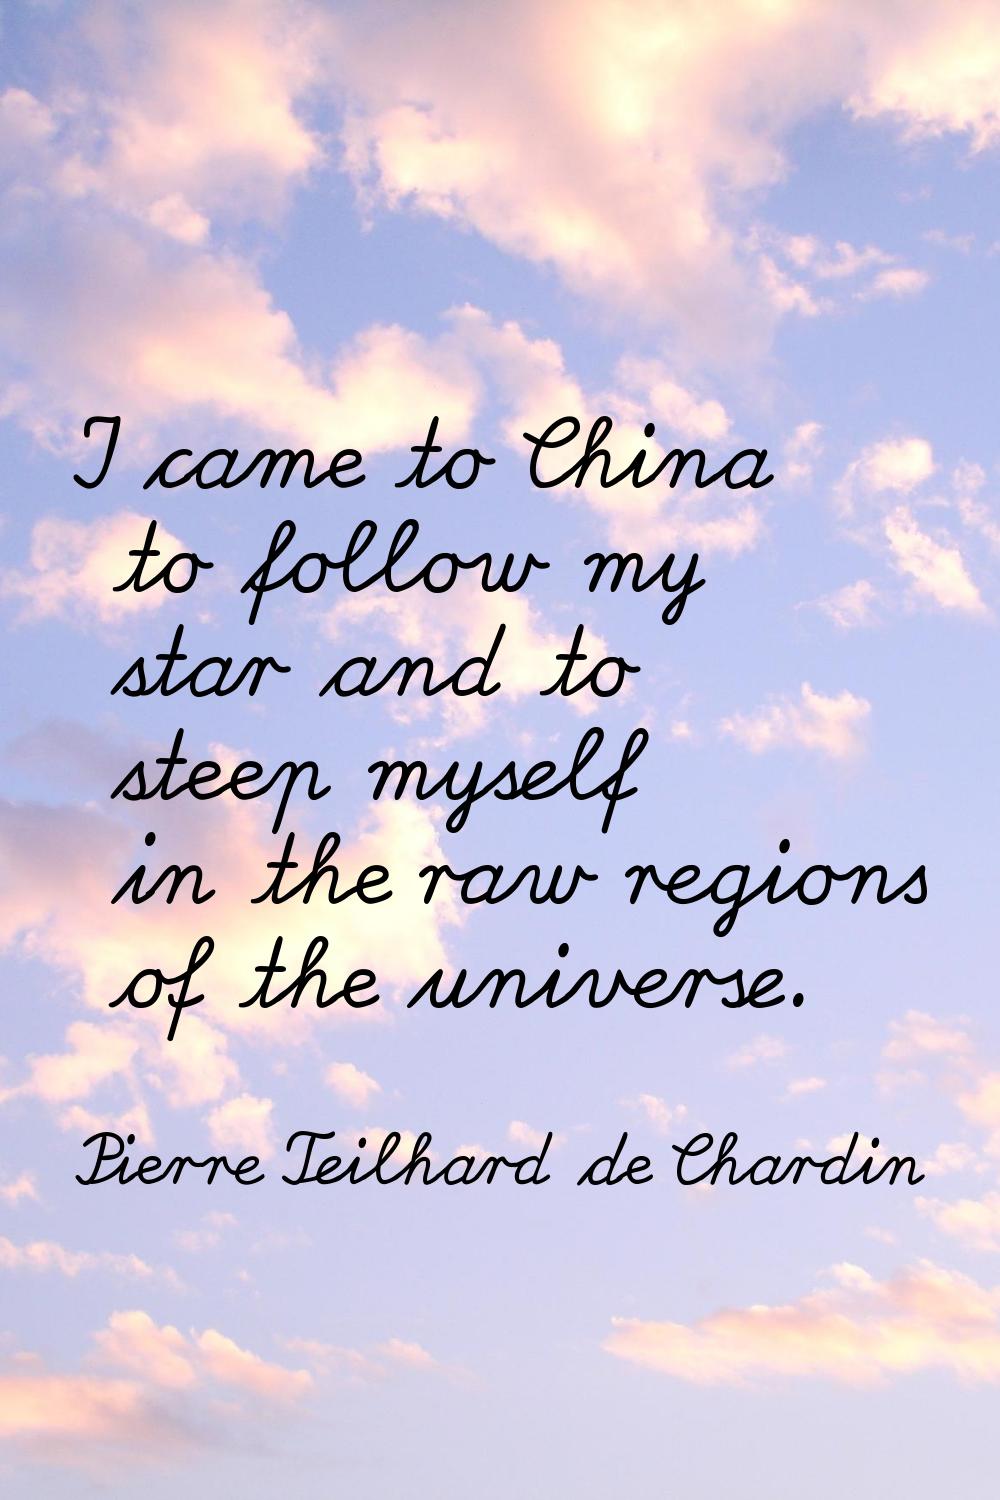 I came to China to follow my star and to steep myself in the raw regions of the universe.